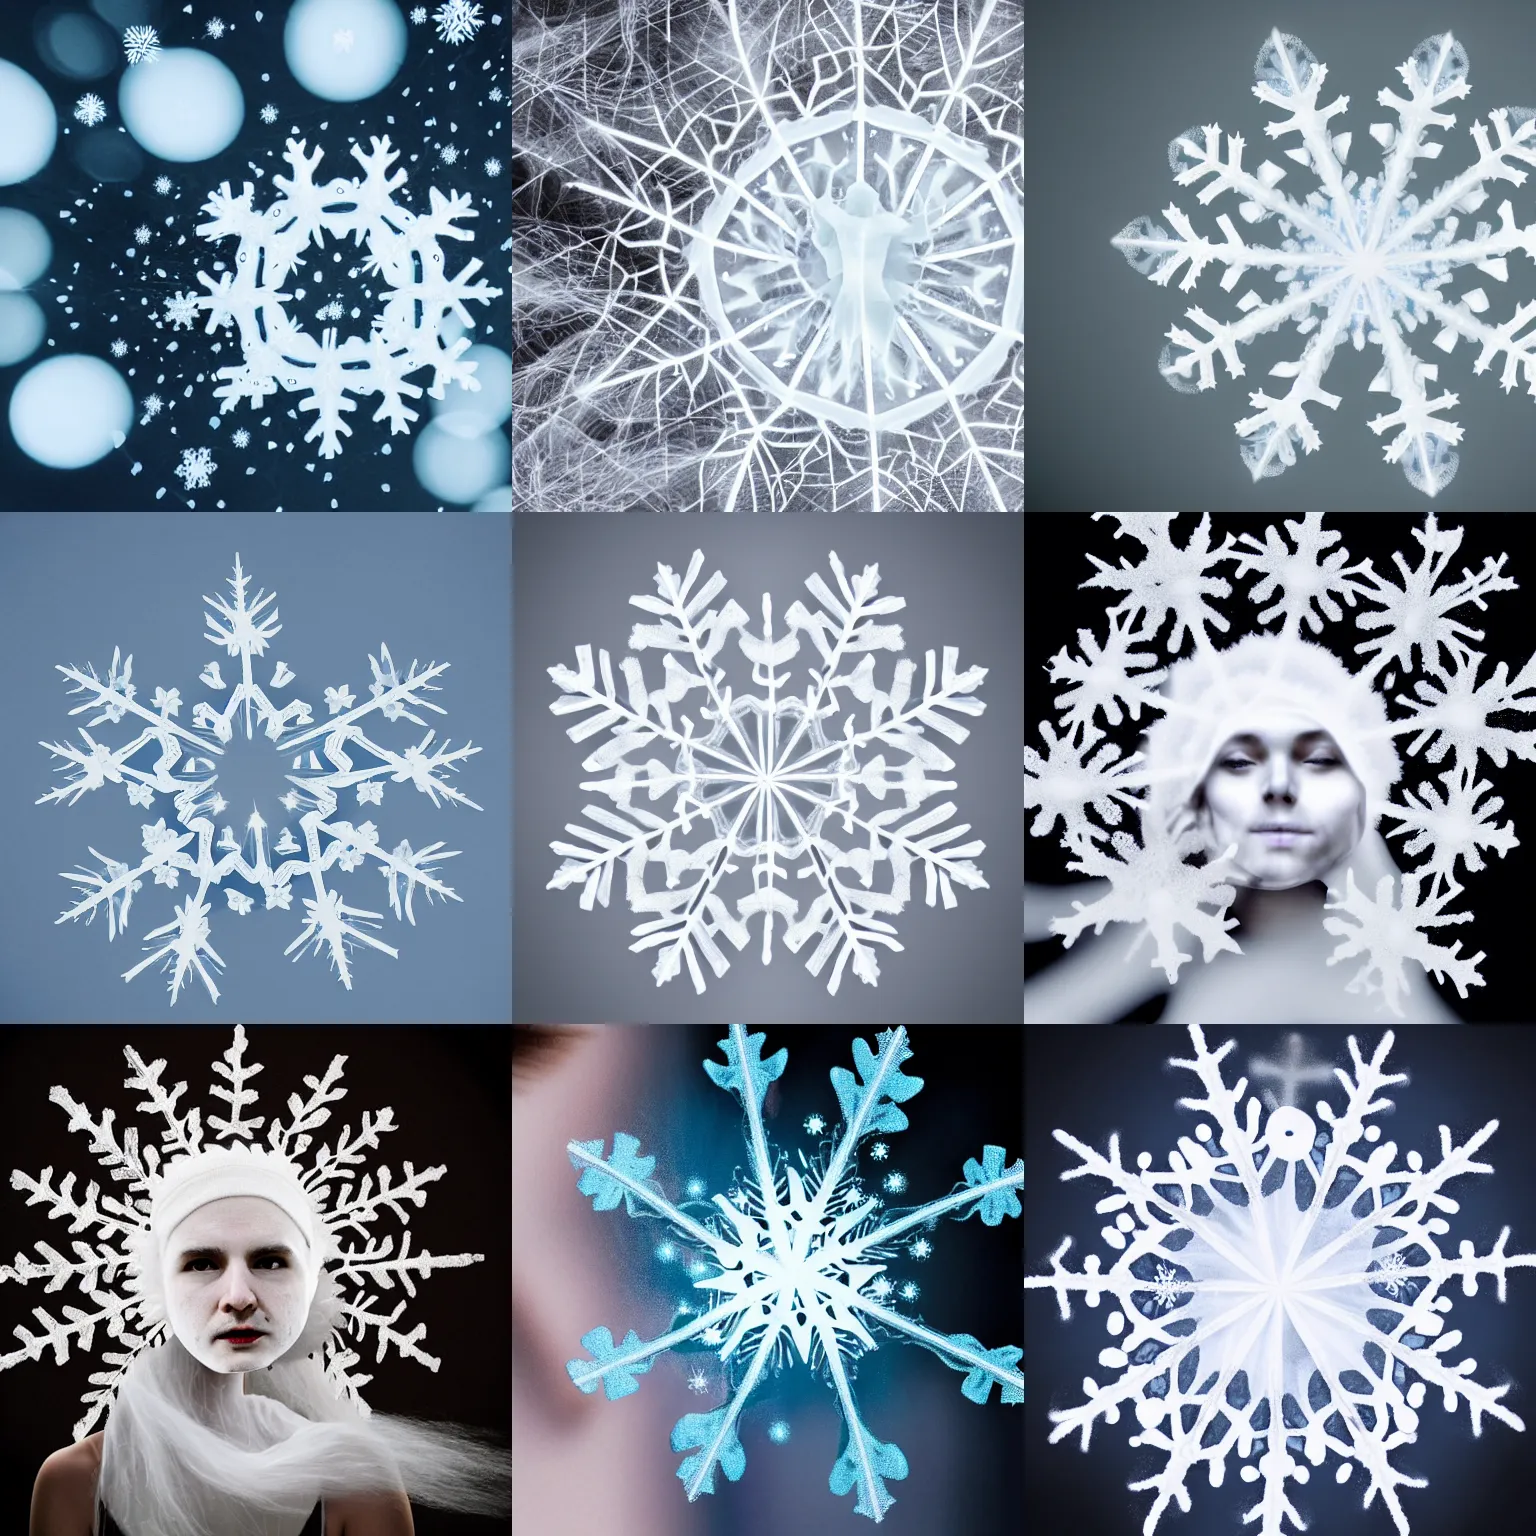 Prompt: surreal photography silk snowflake with a ghostly white human face